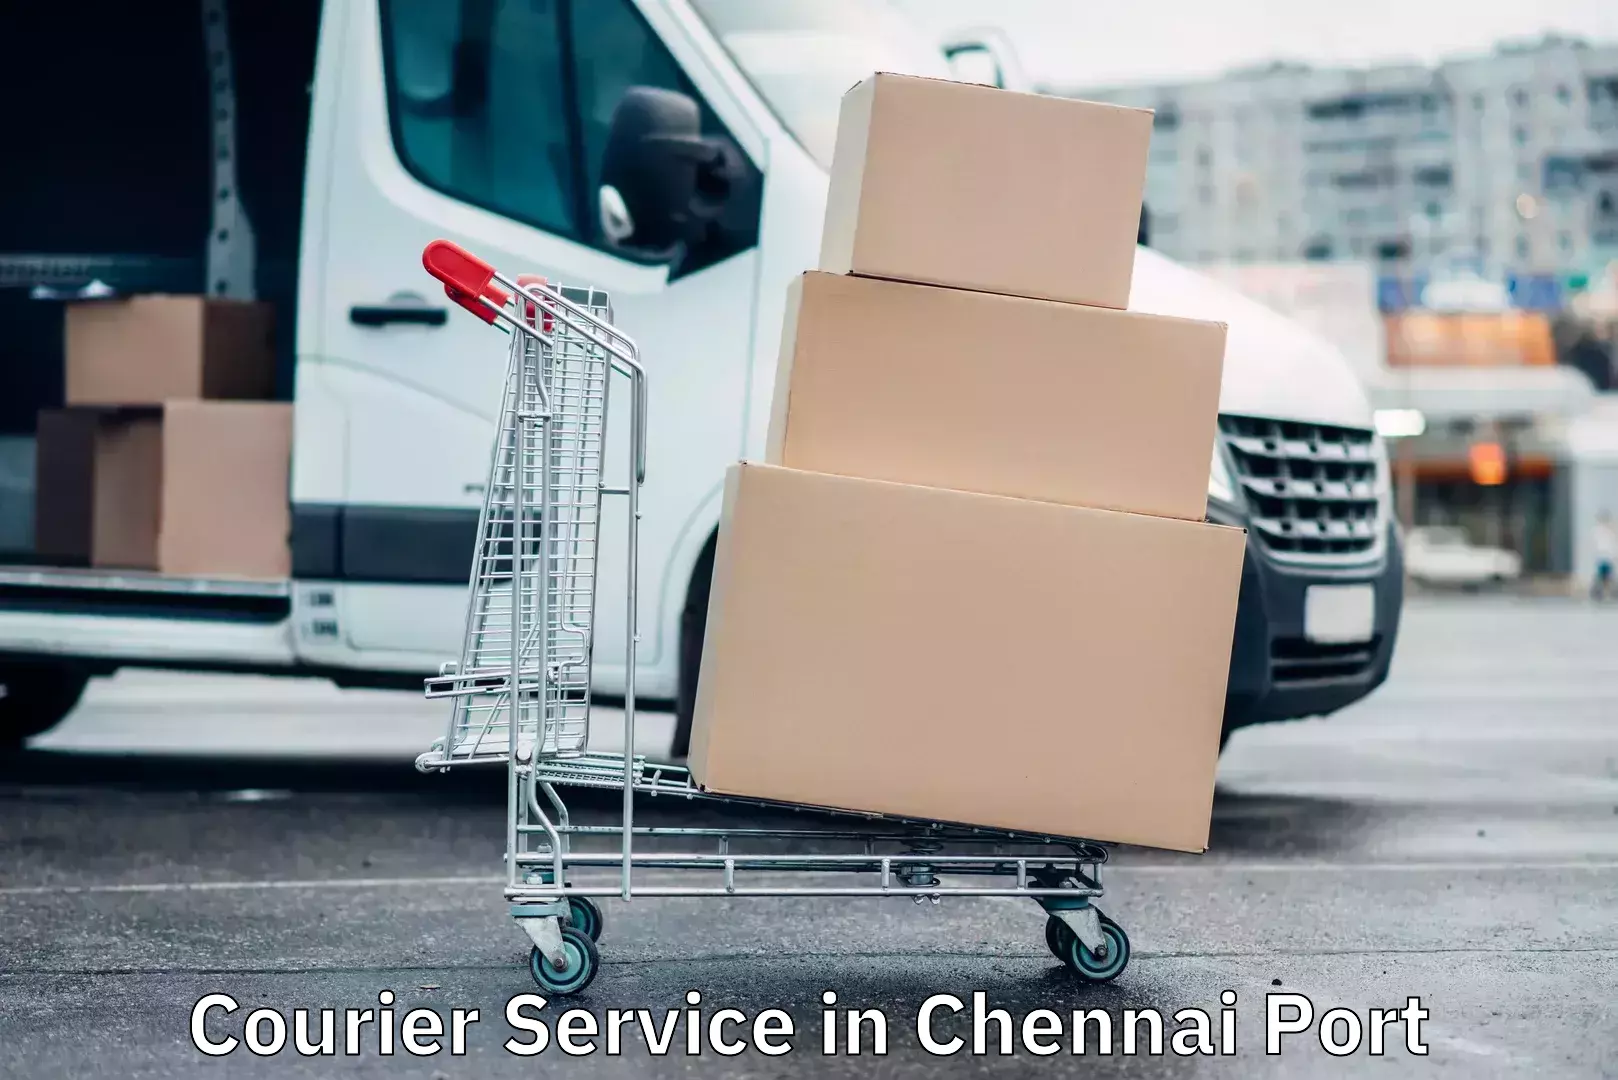 Efficient courier operations in Chennai Port